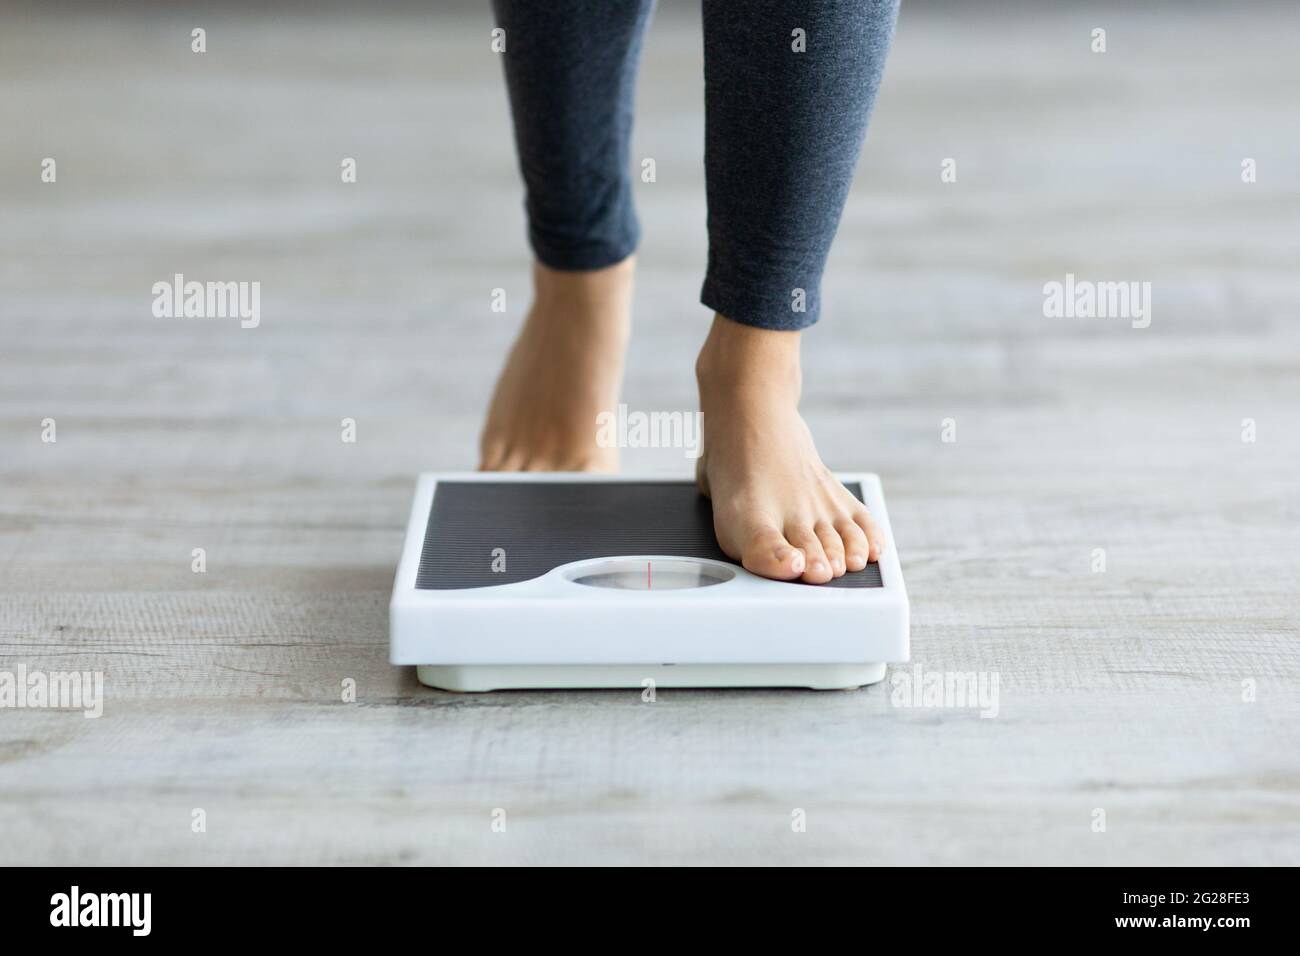 https://c8.alamy.com/comp/2G28FE3/unrecognizable-young-indian-woman-stepping-on-scales-to-measure-her-weight-at-home-closeup-of-feet-2G28FE3.jpg